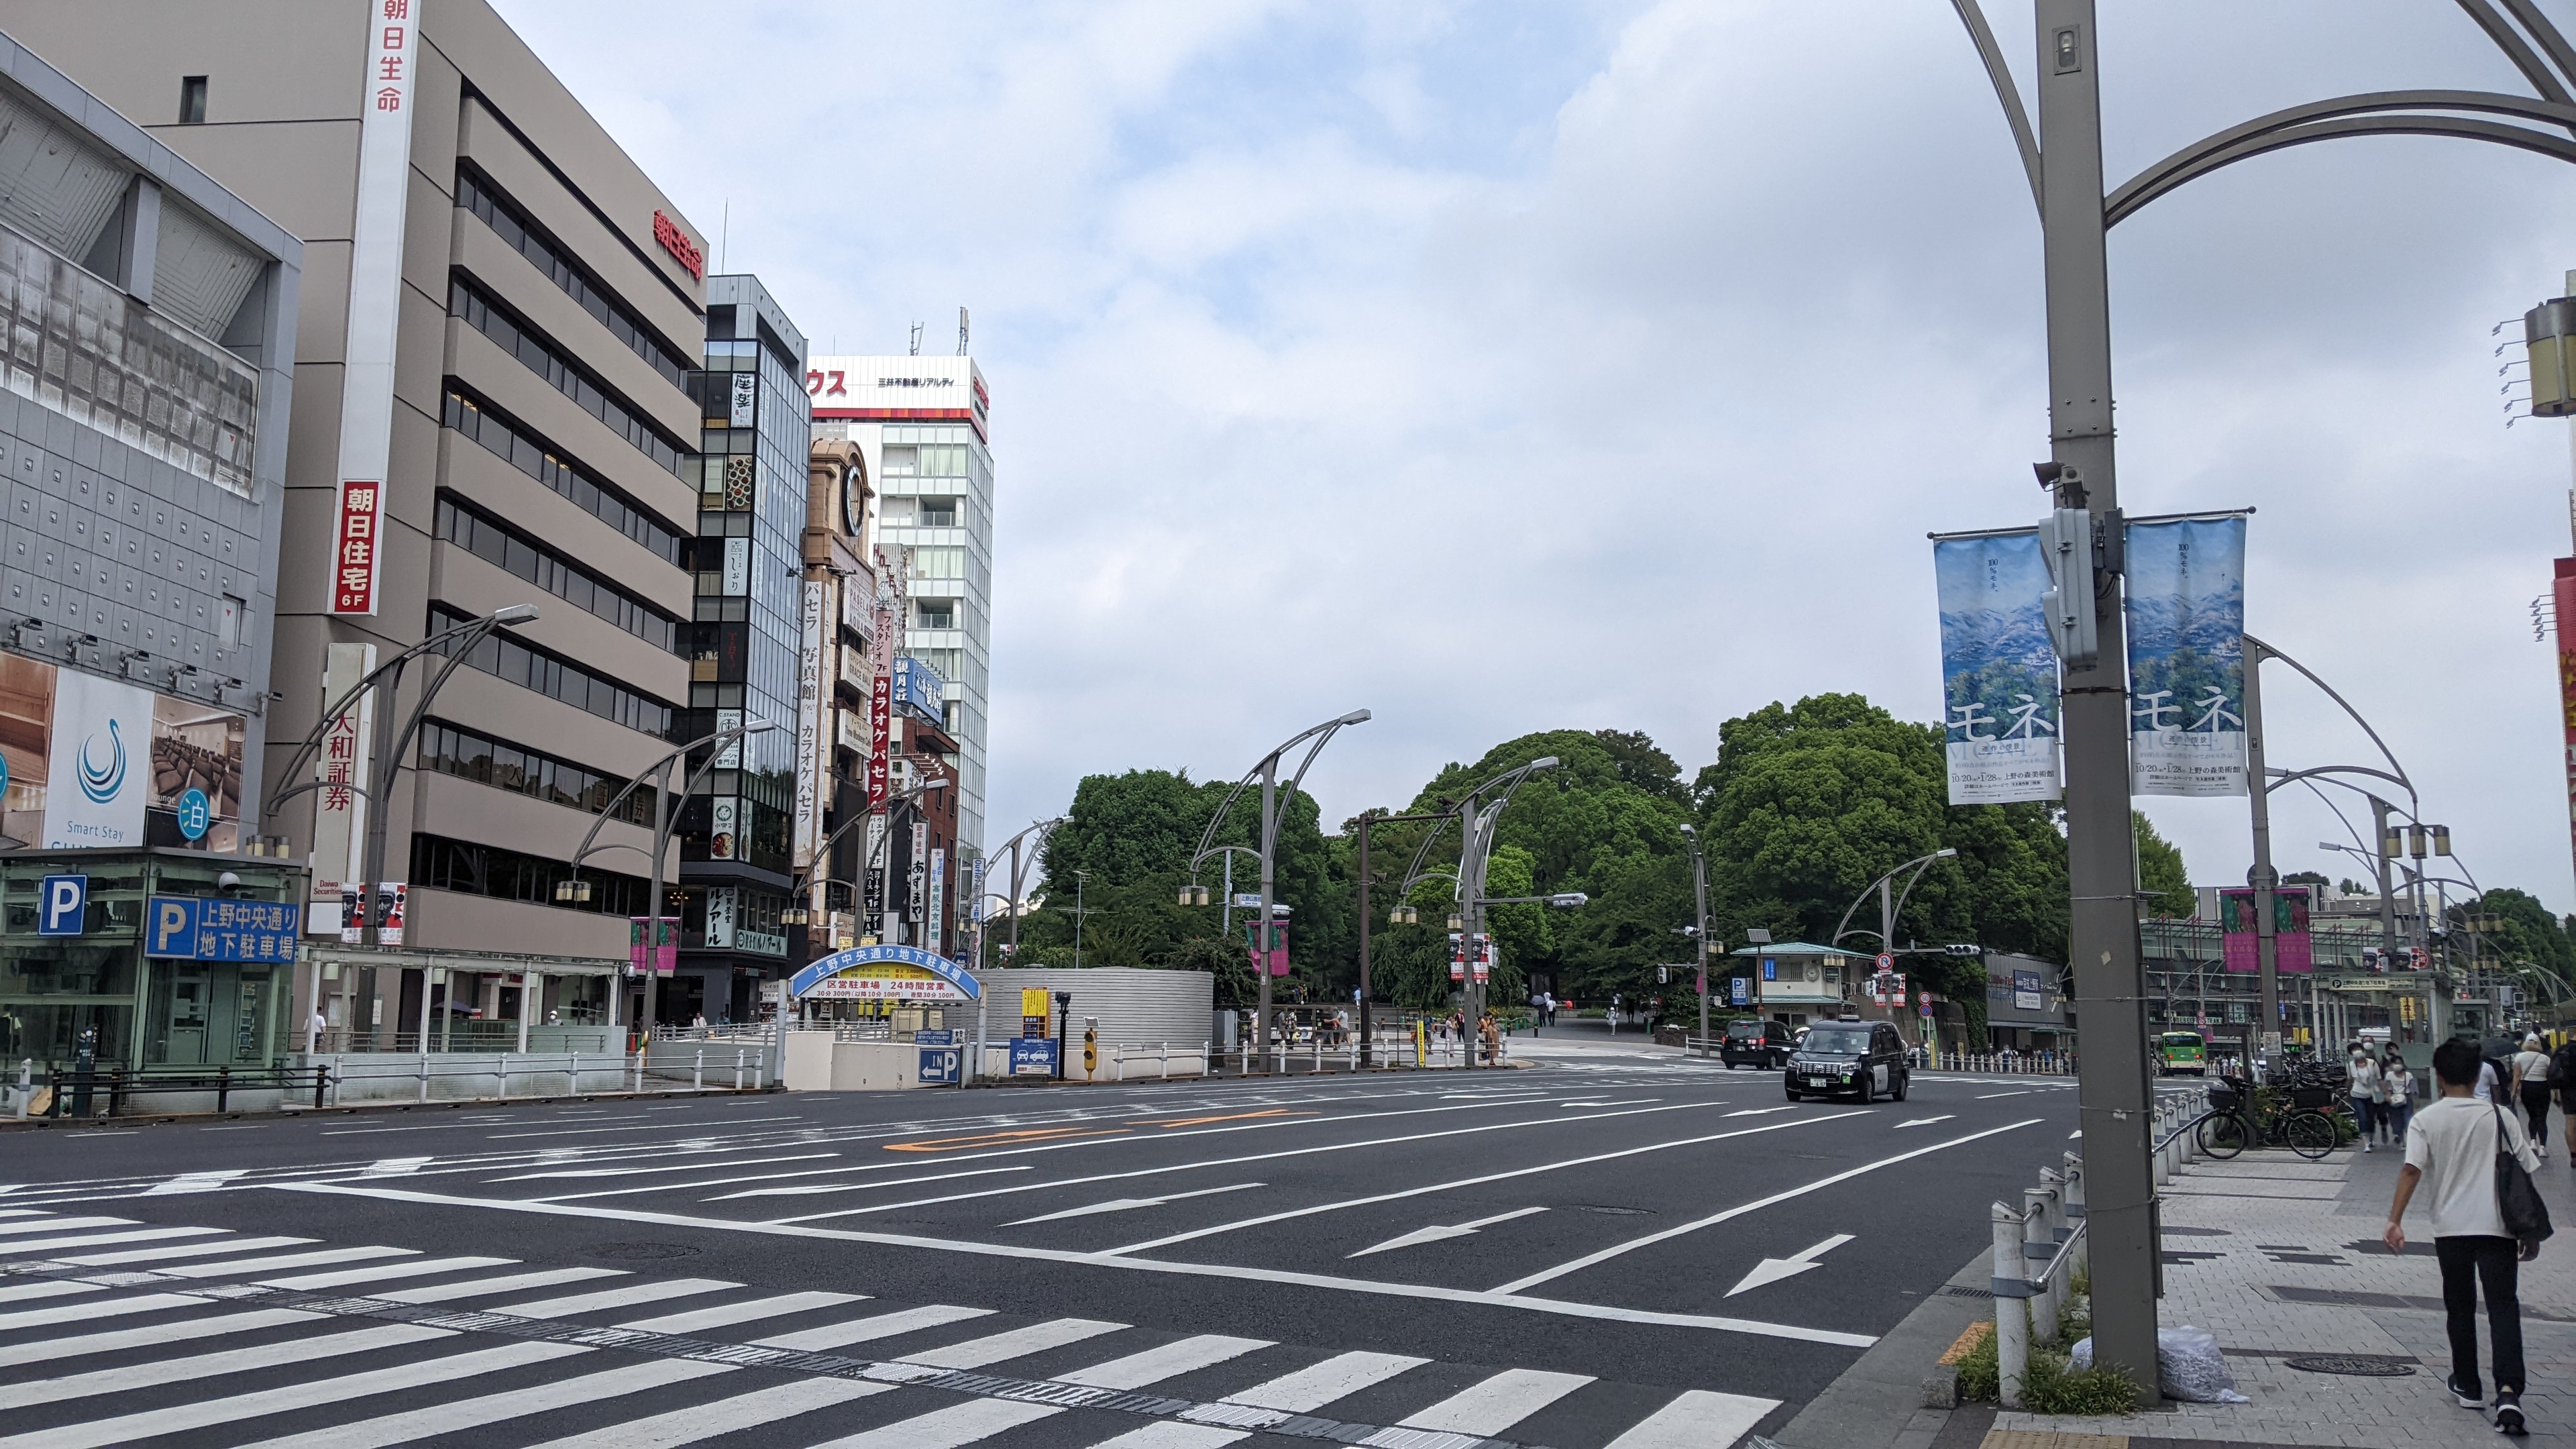 Some buildings and the entrance to Ueno Park